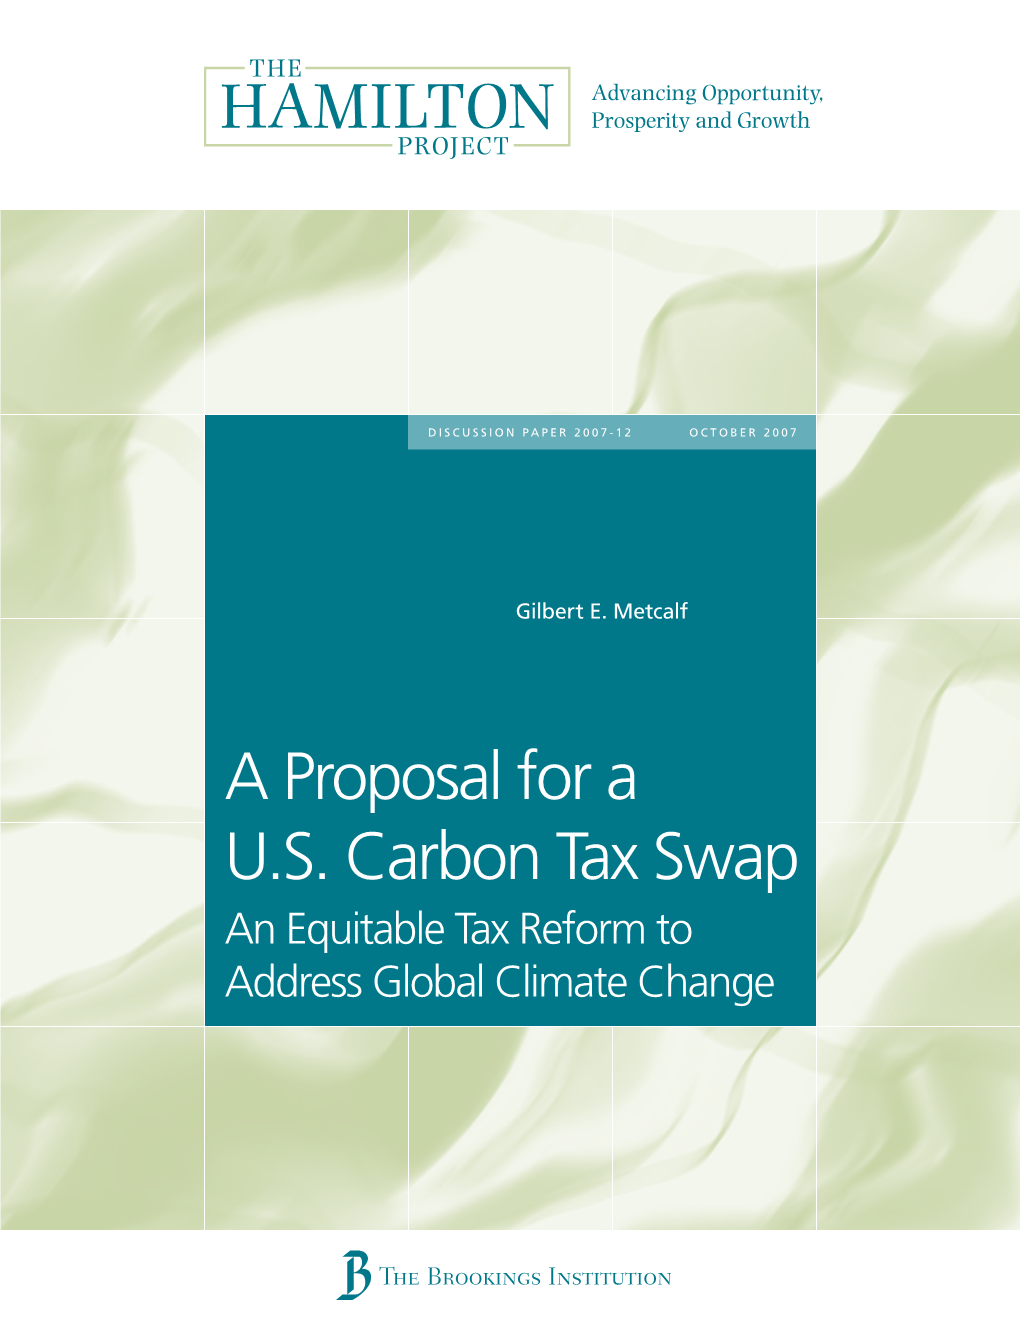 A Proposal for a U.S Carbon Tax Swap. an Equitable